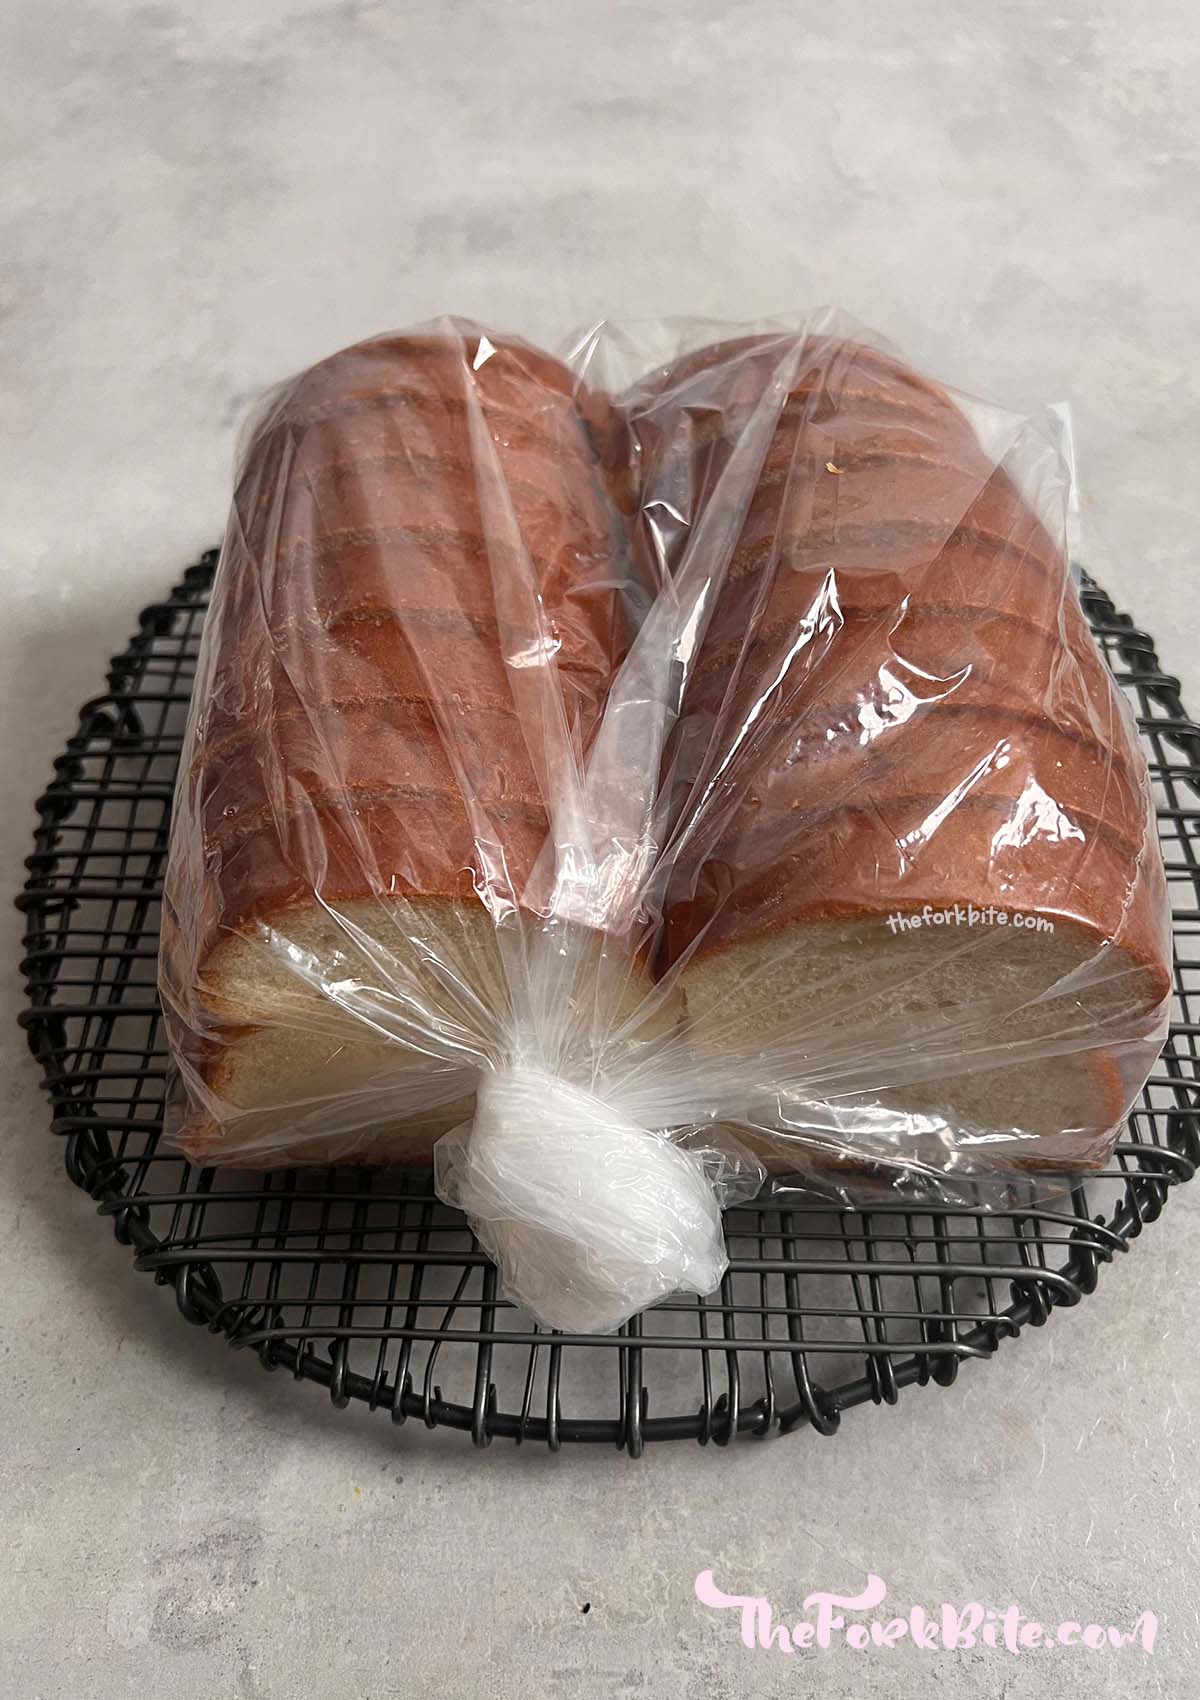 Did you know that you can refreeze bread? Follow these simple steps and enjoy fresh bread anytime!